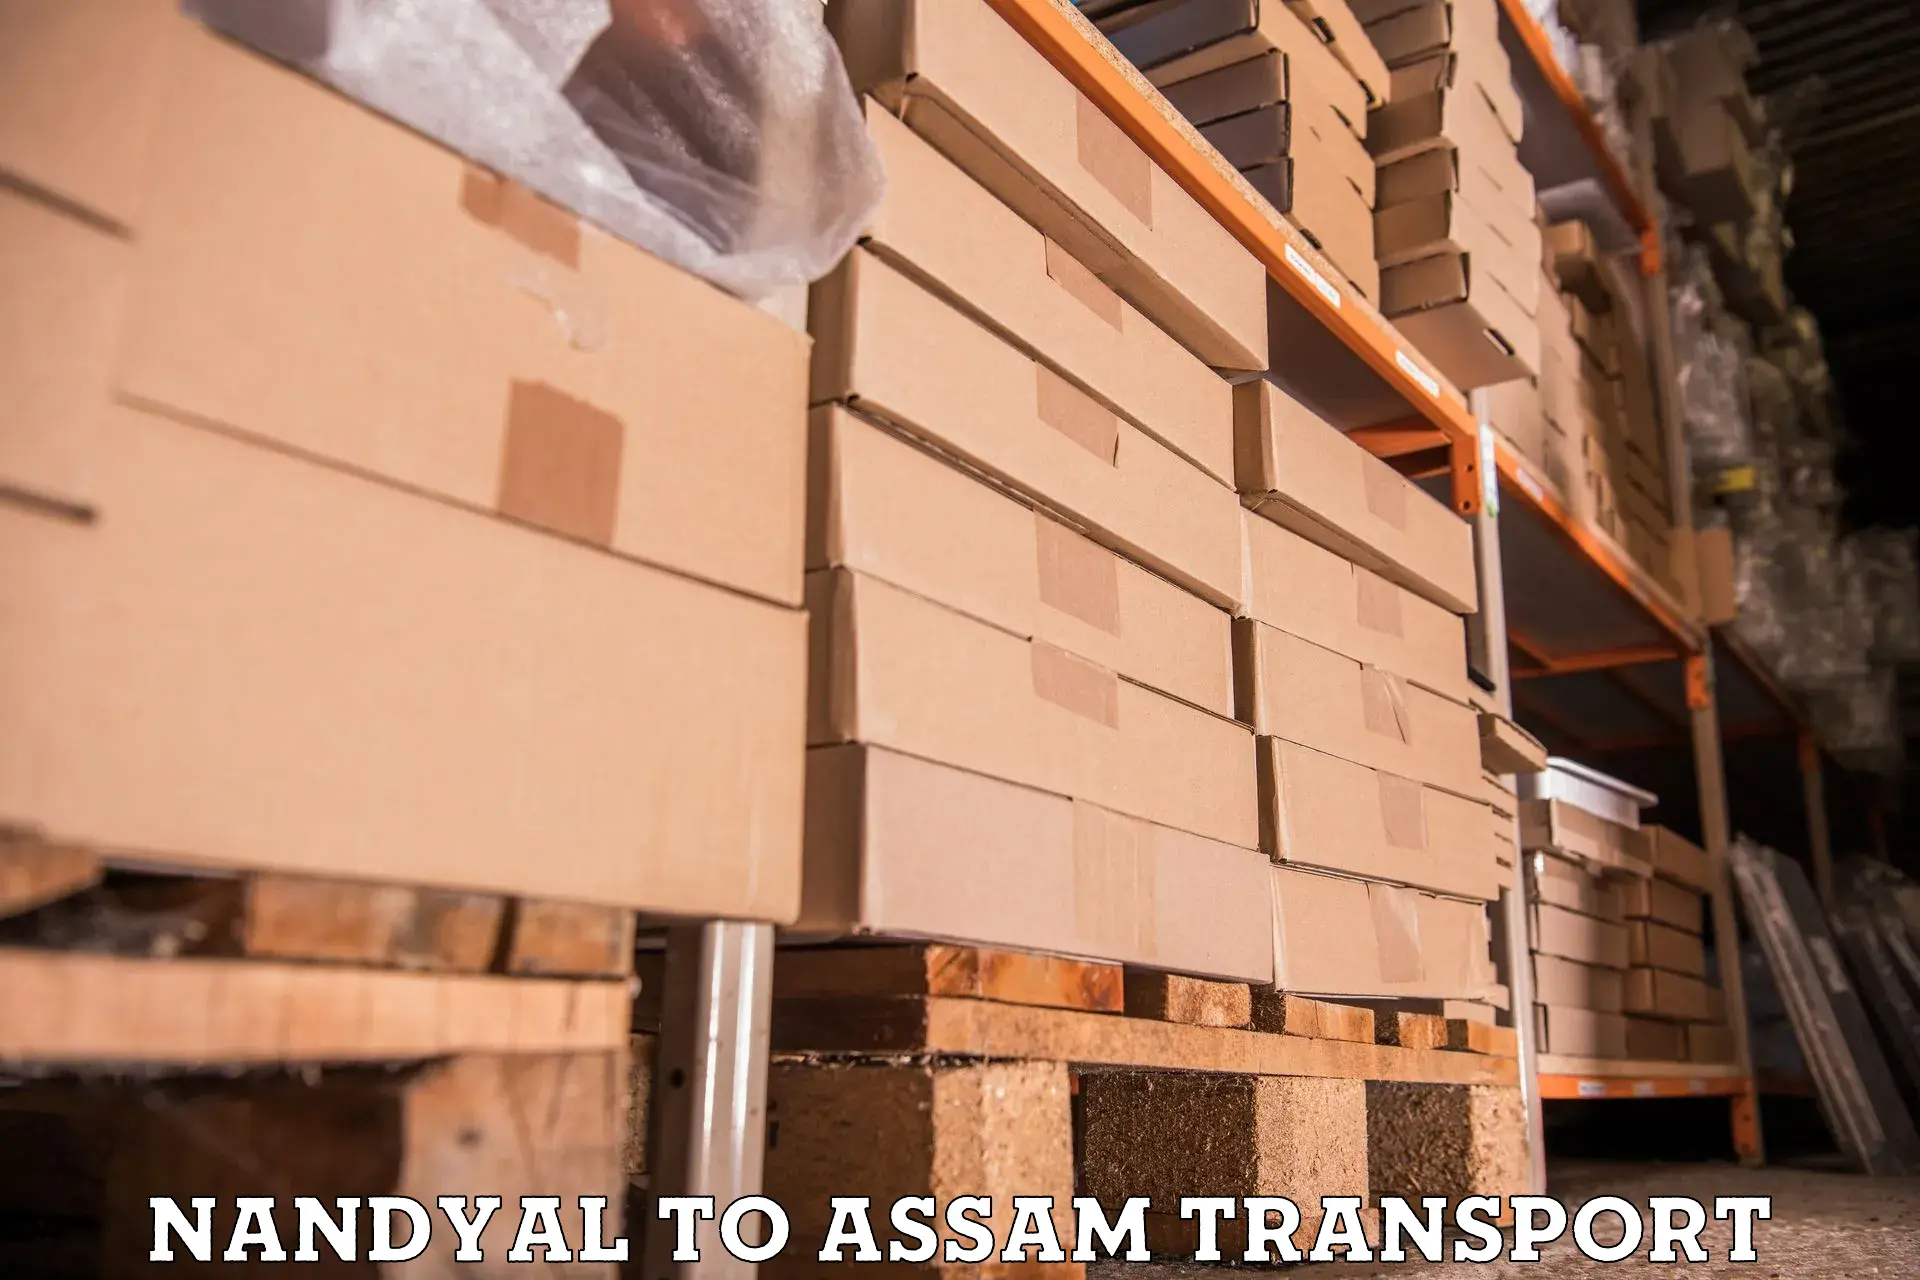 Container transport service Nandyal to Karbi Anglong